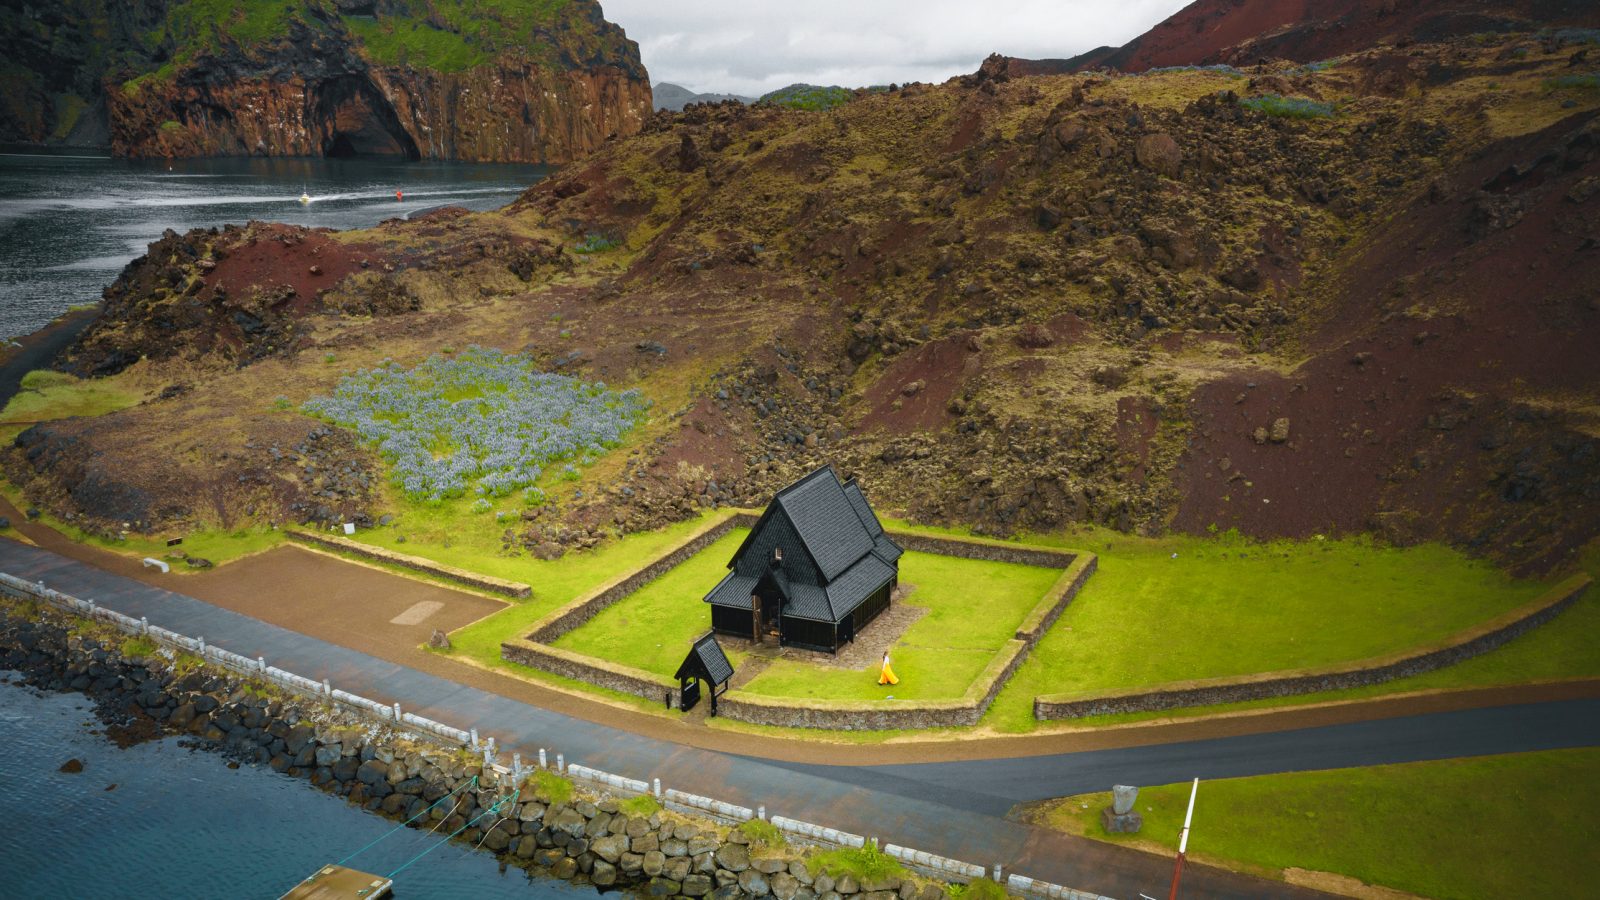 a view from above of the Heimaey stave church, the harbor, and the surrounding volcanic landscape